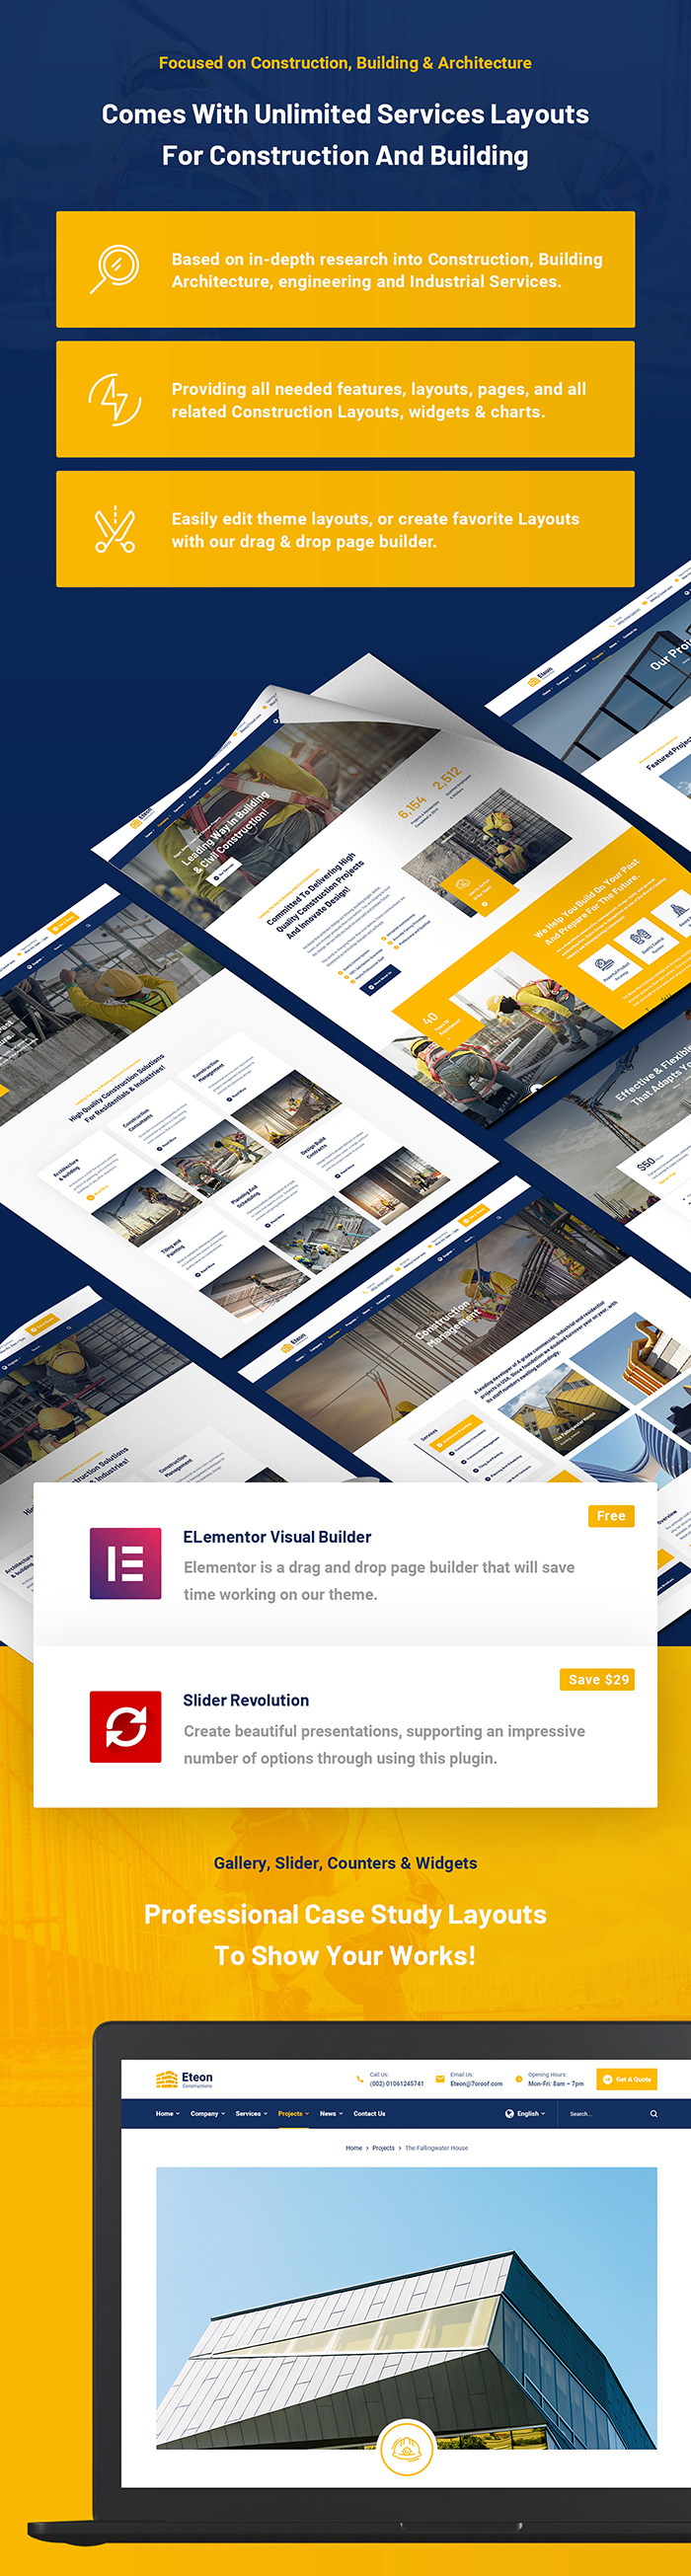 Eteon - Construction And Building WordPress Theme - 6